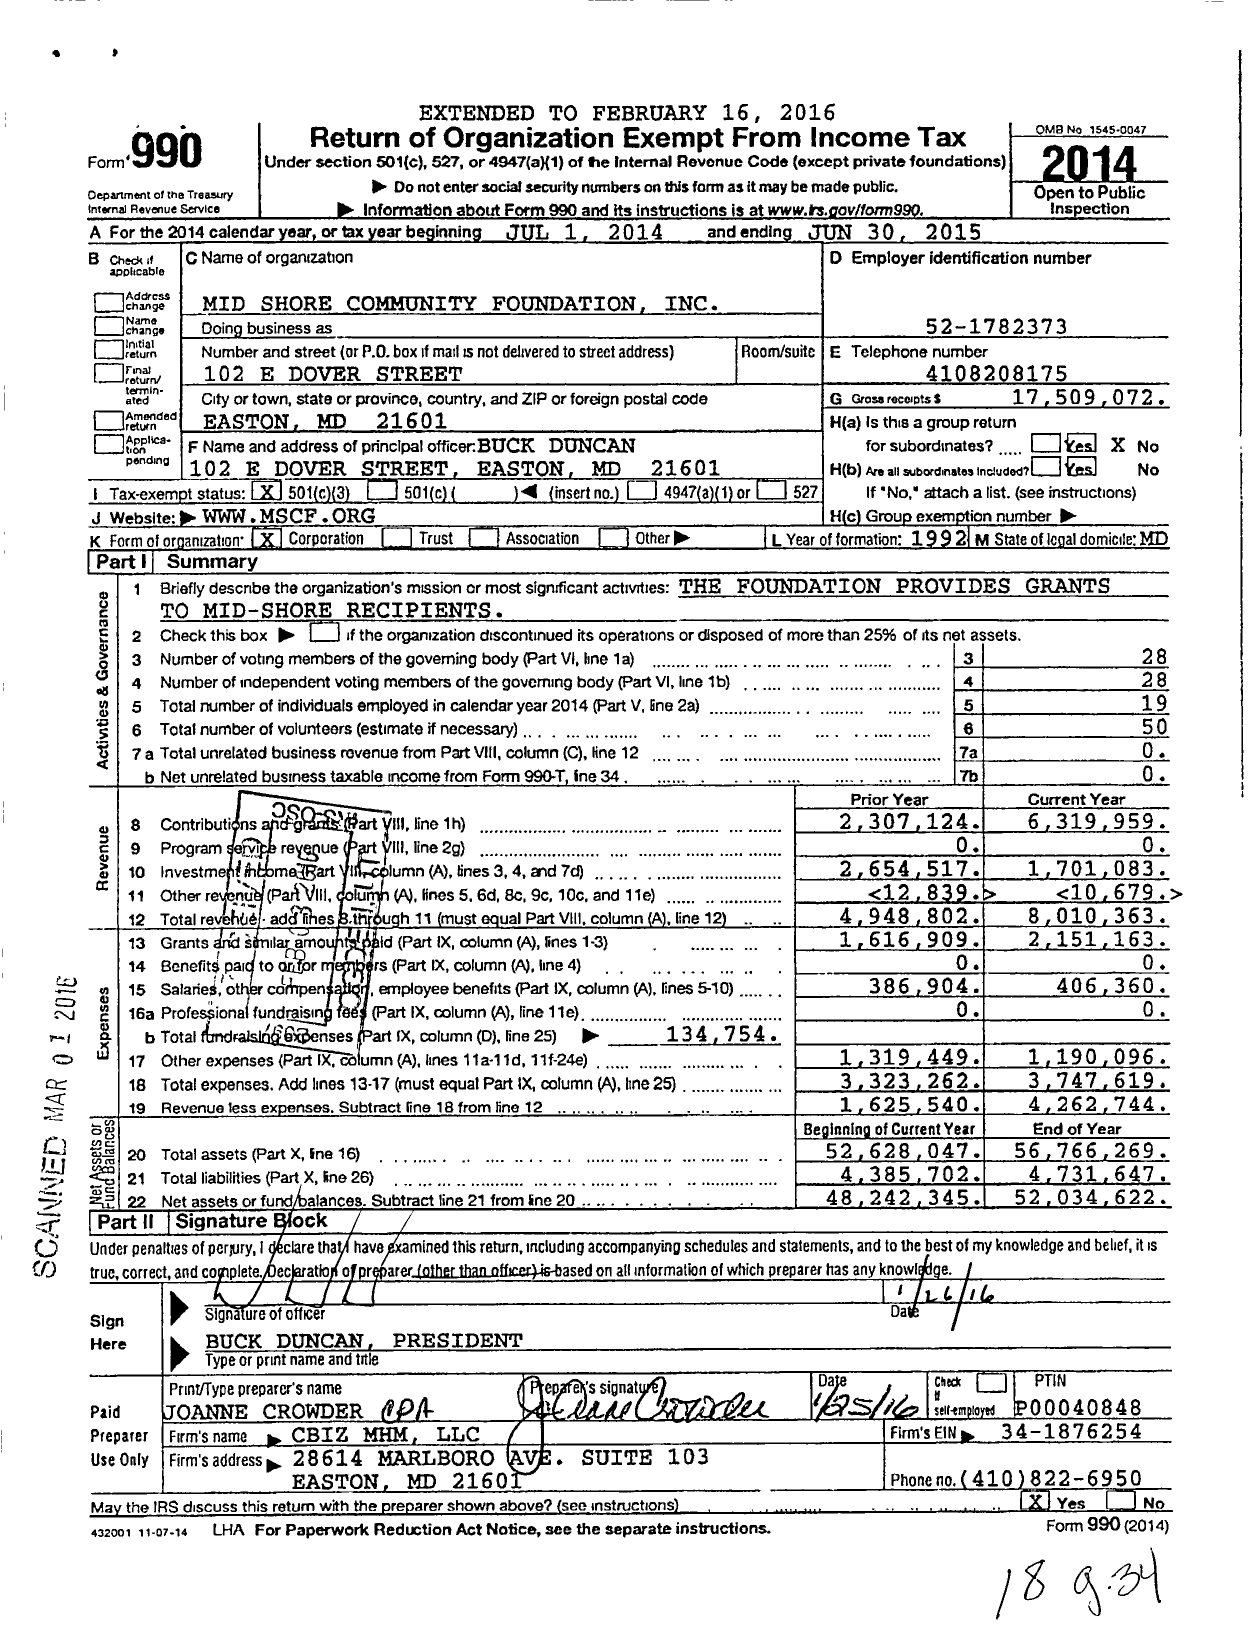 Image of first page of 2014 Form 990 for Mid-Shore Community Foundation